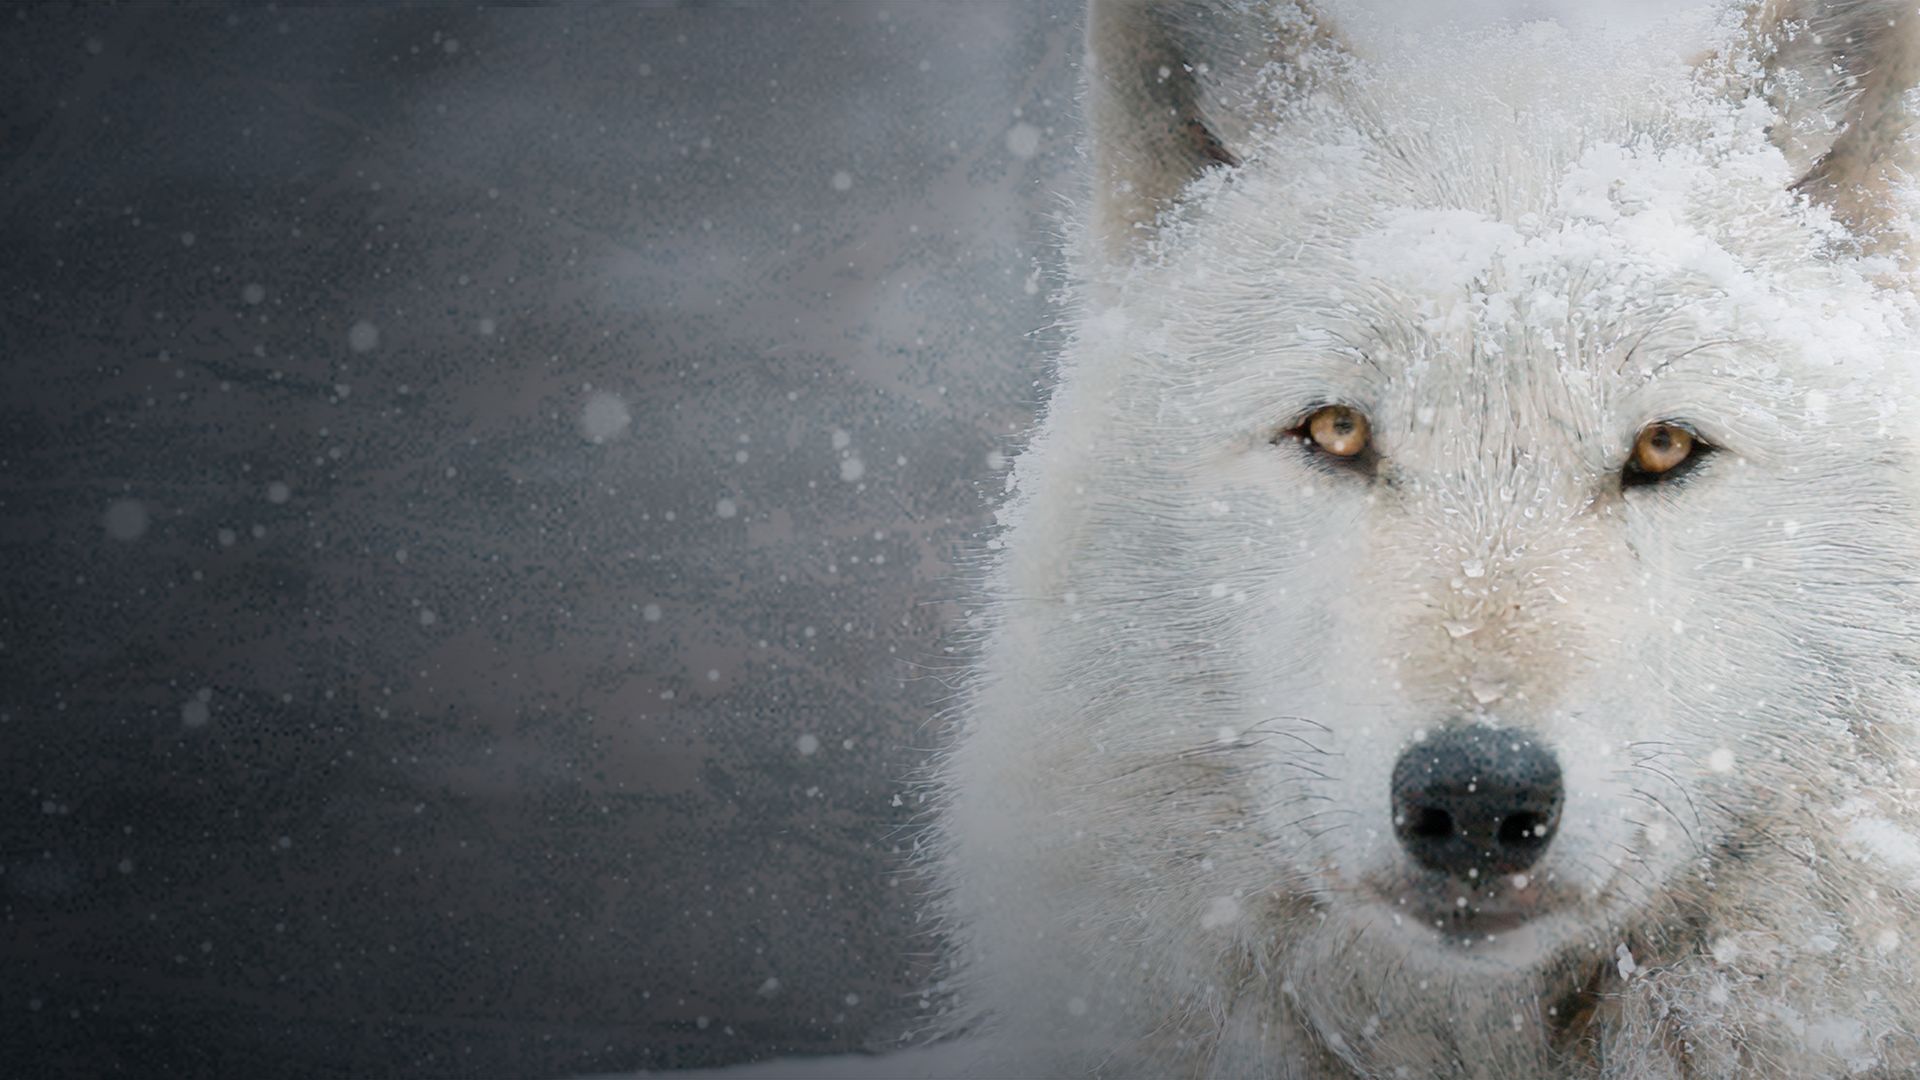 White Wolves: Ghosts of the Arctic 4K